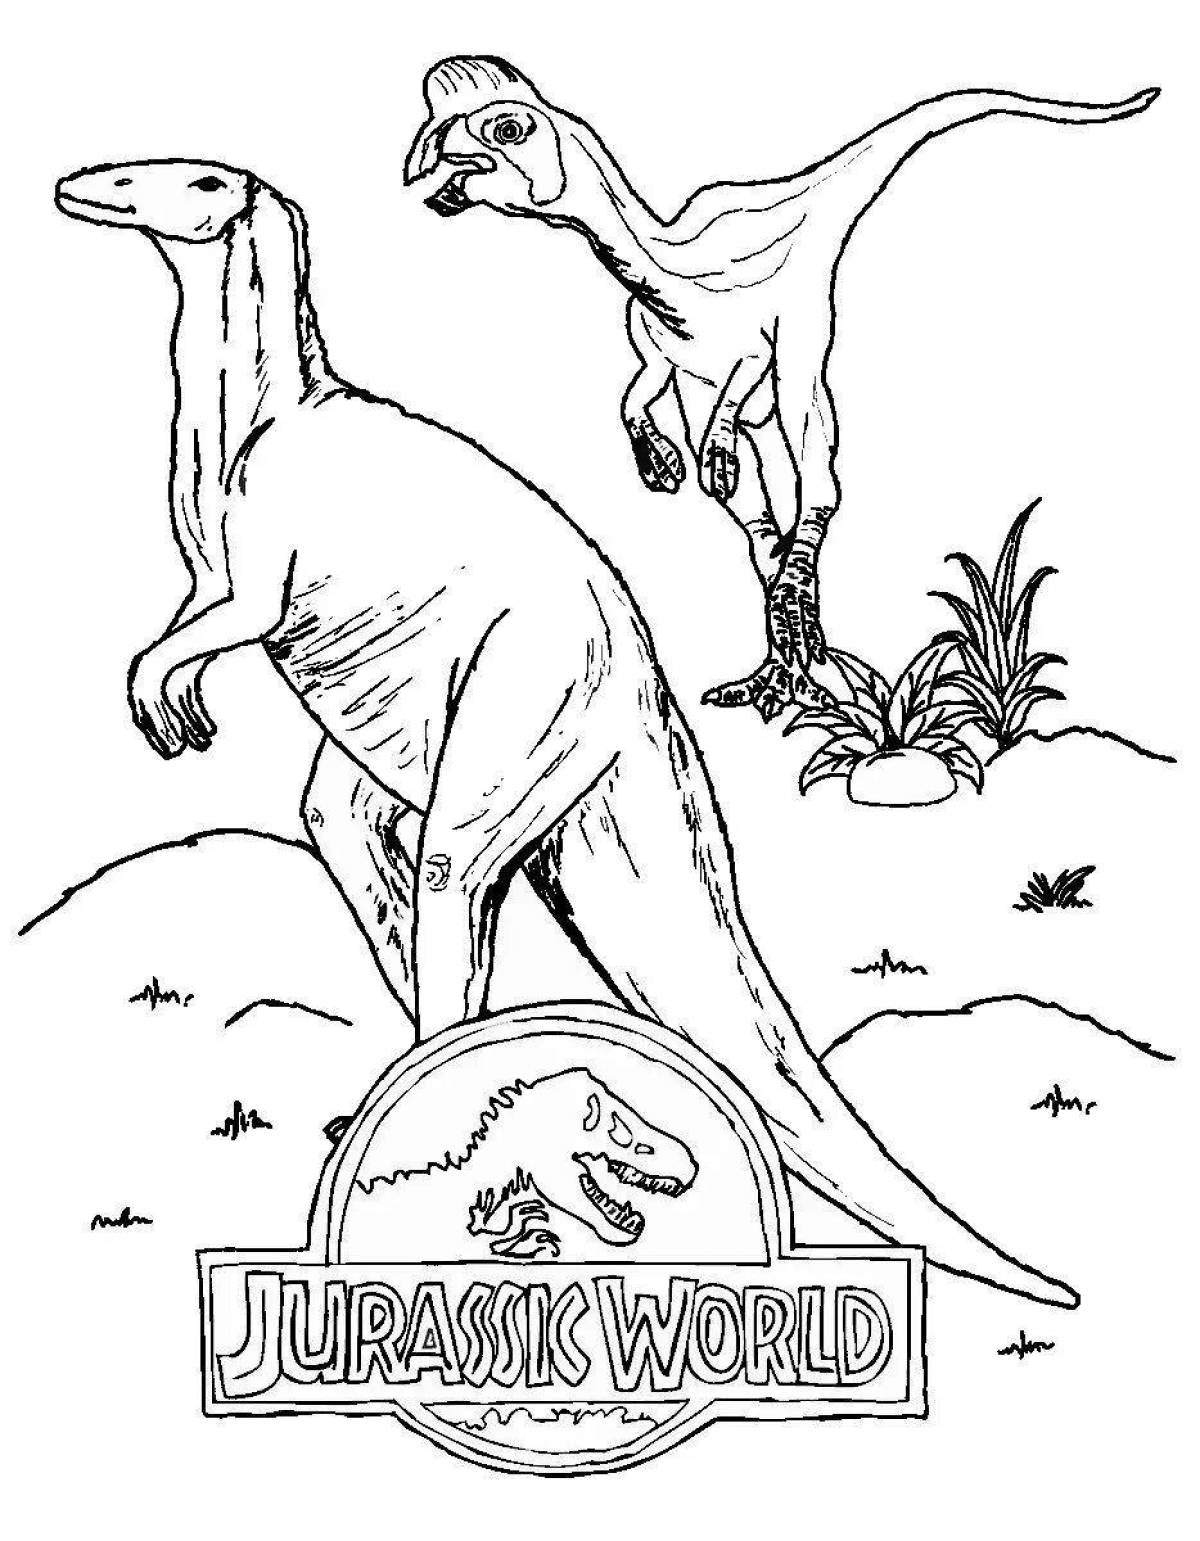 Intriguing Jurassic coloring book